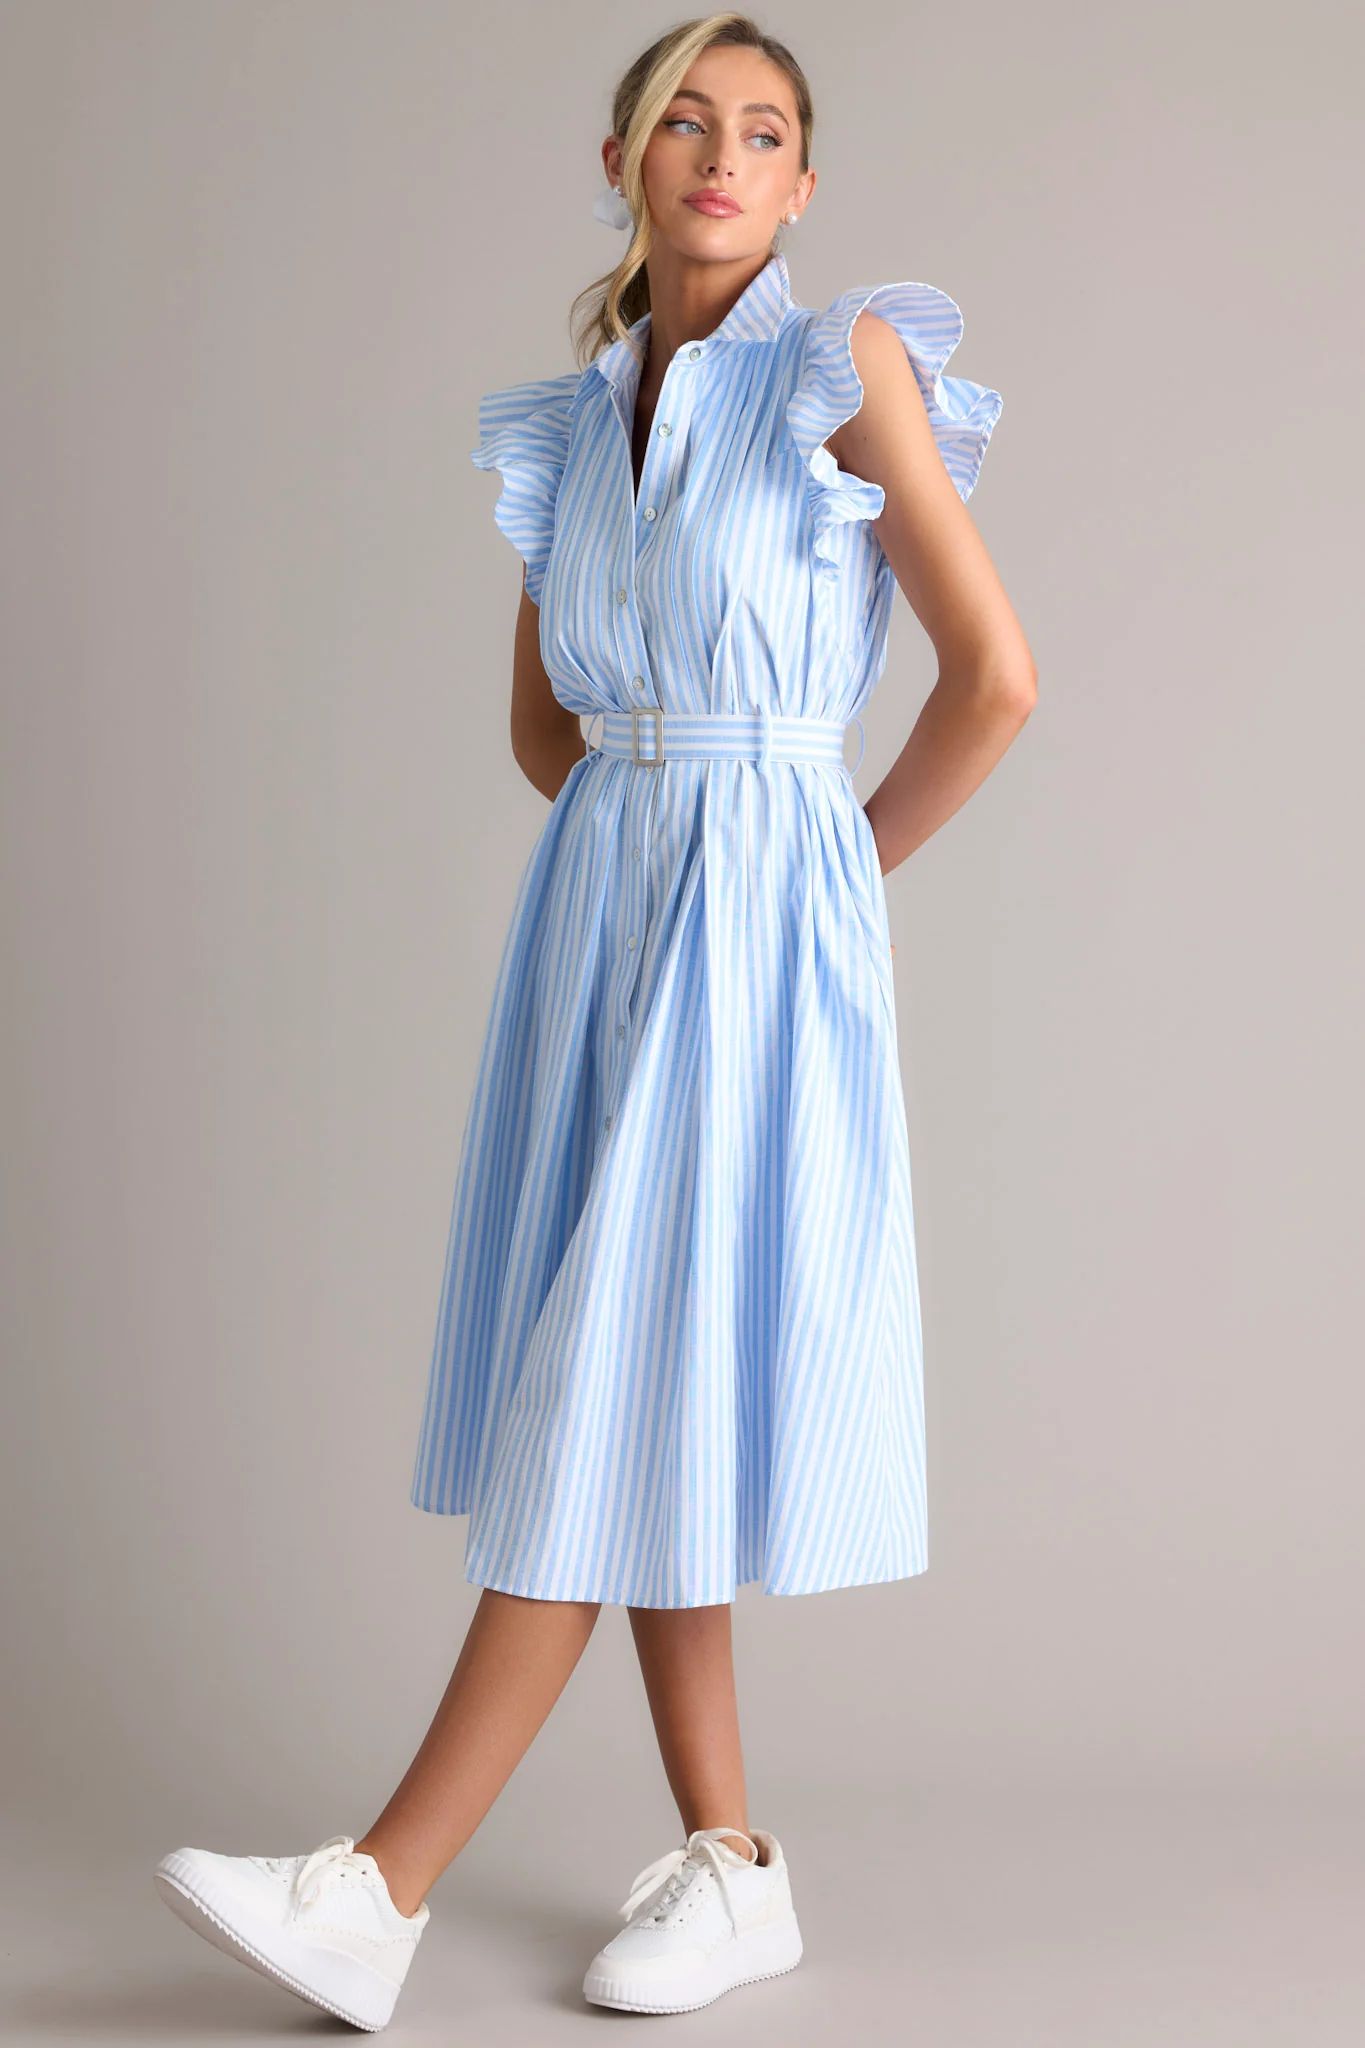 Simple Statement Sky Blue and White Stripe Button Front Midi Dress | Red Dress